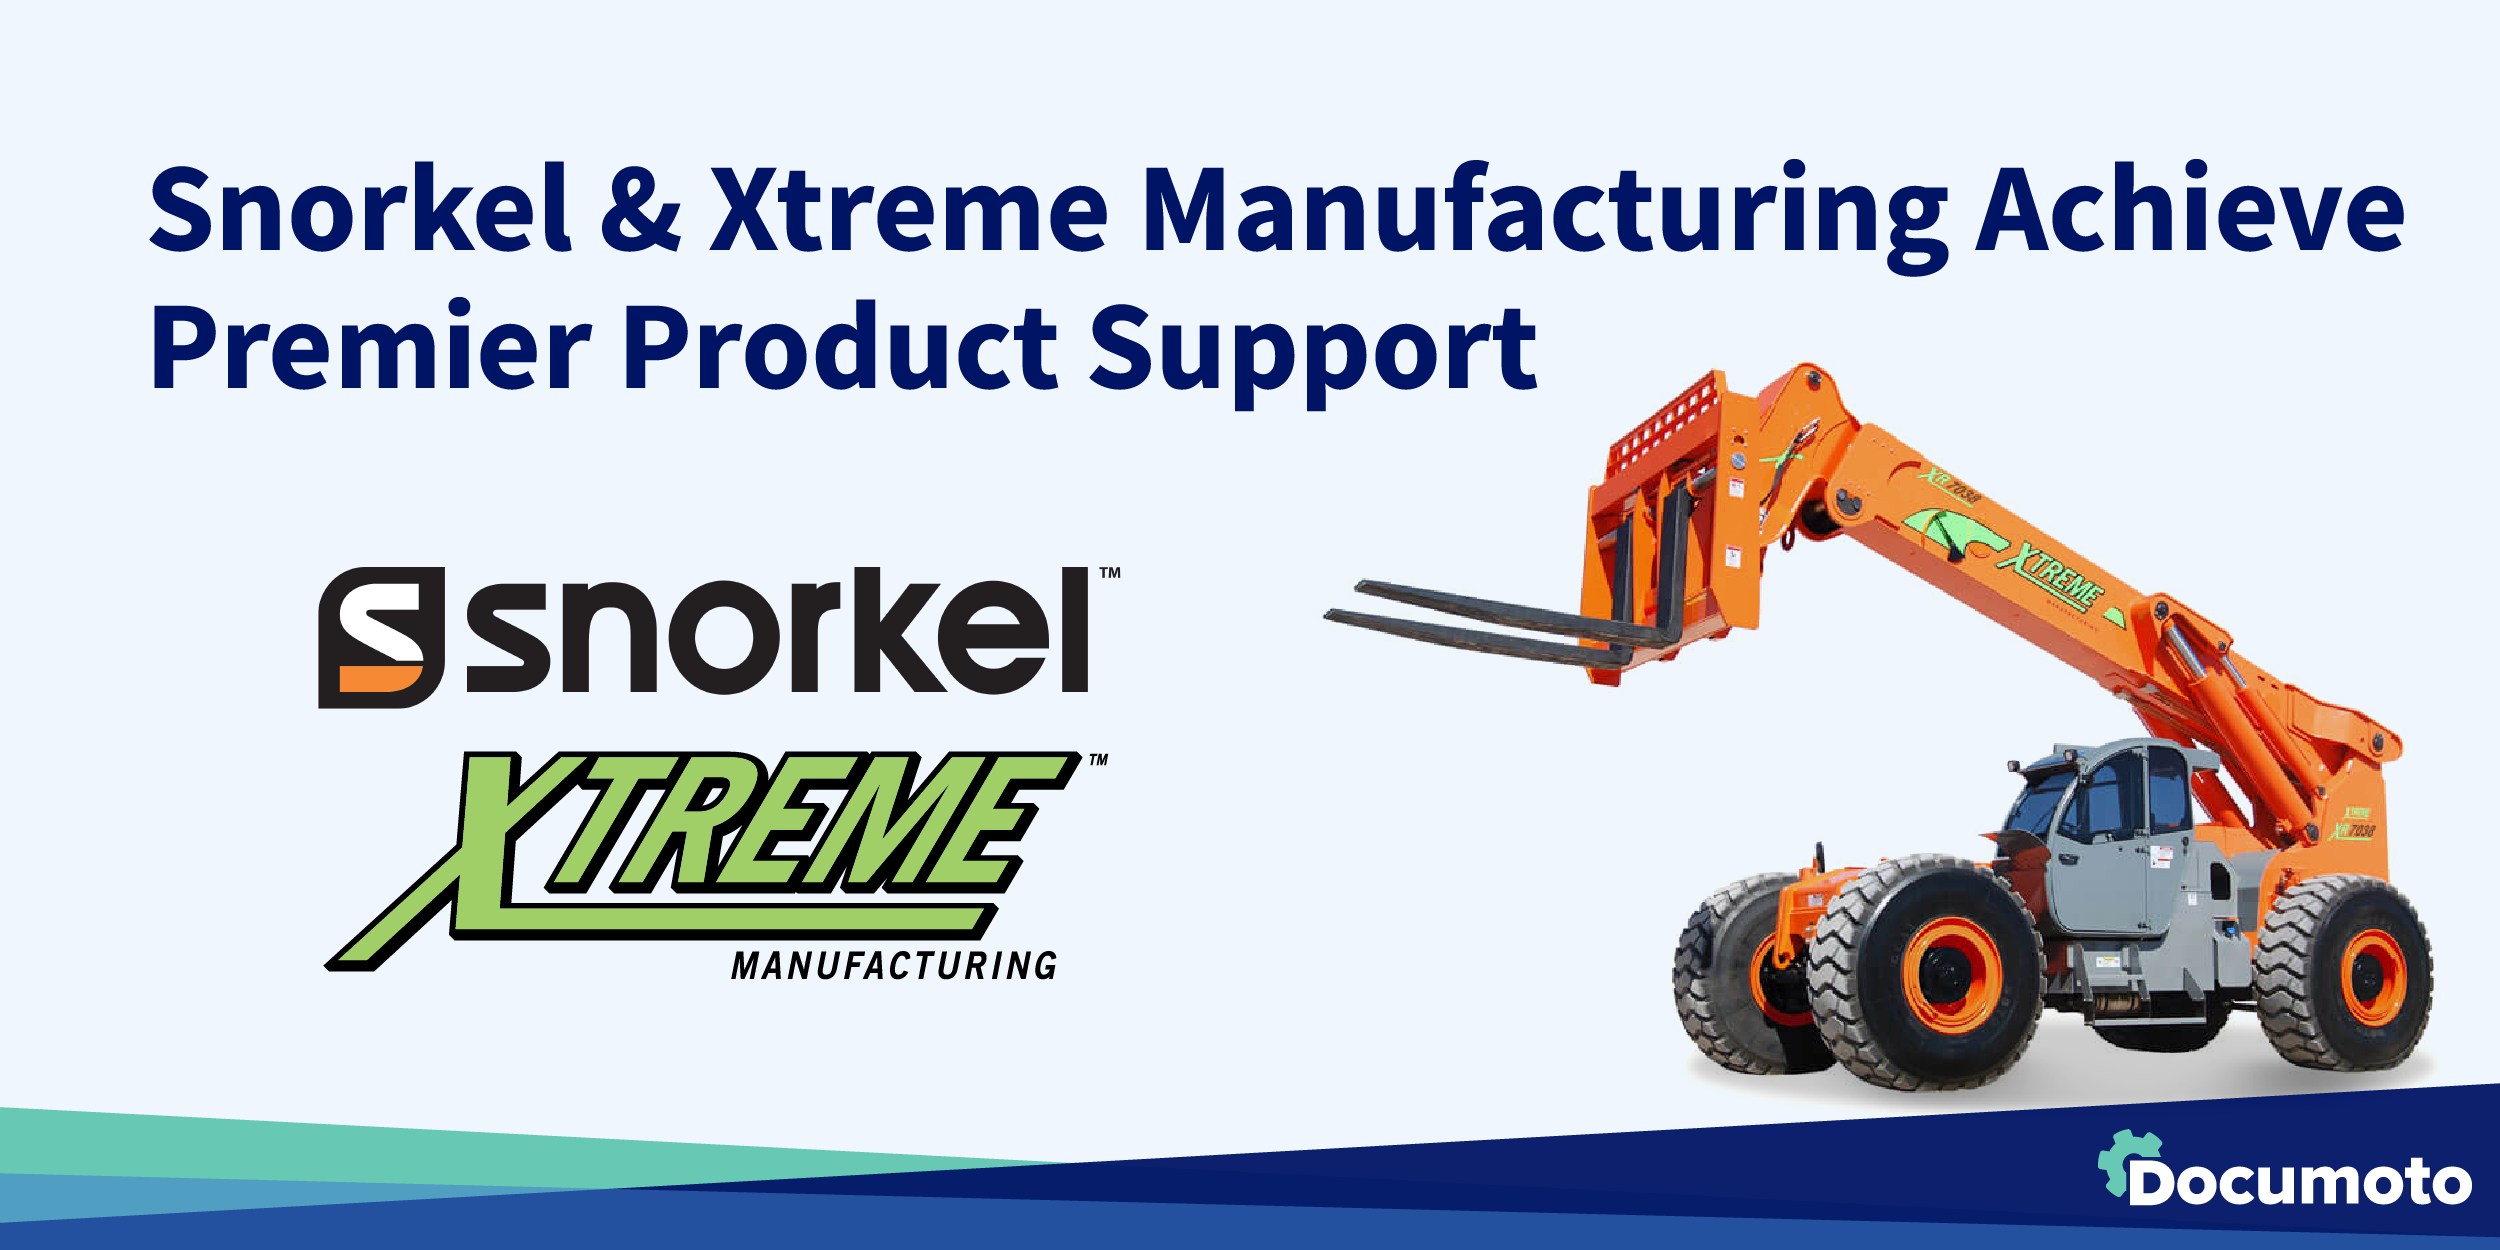 Snorkel & Xtreme Manufacturing Achieve Premier Product Support with Documoto